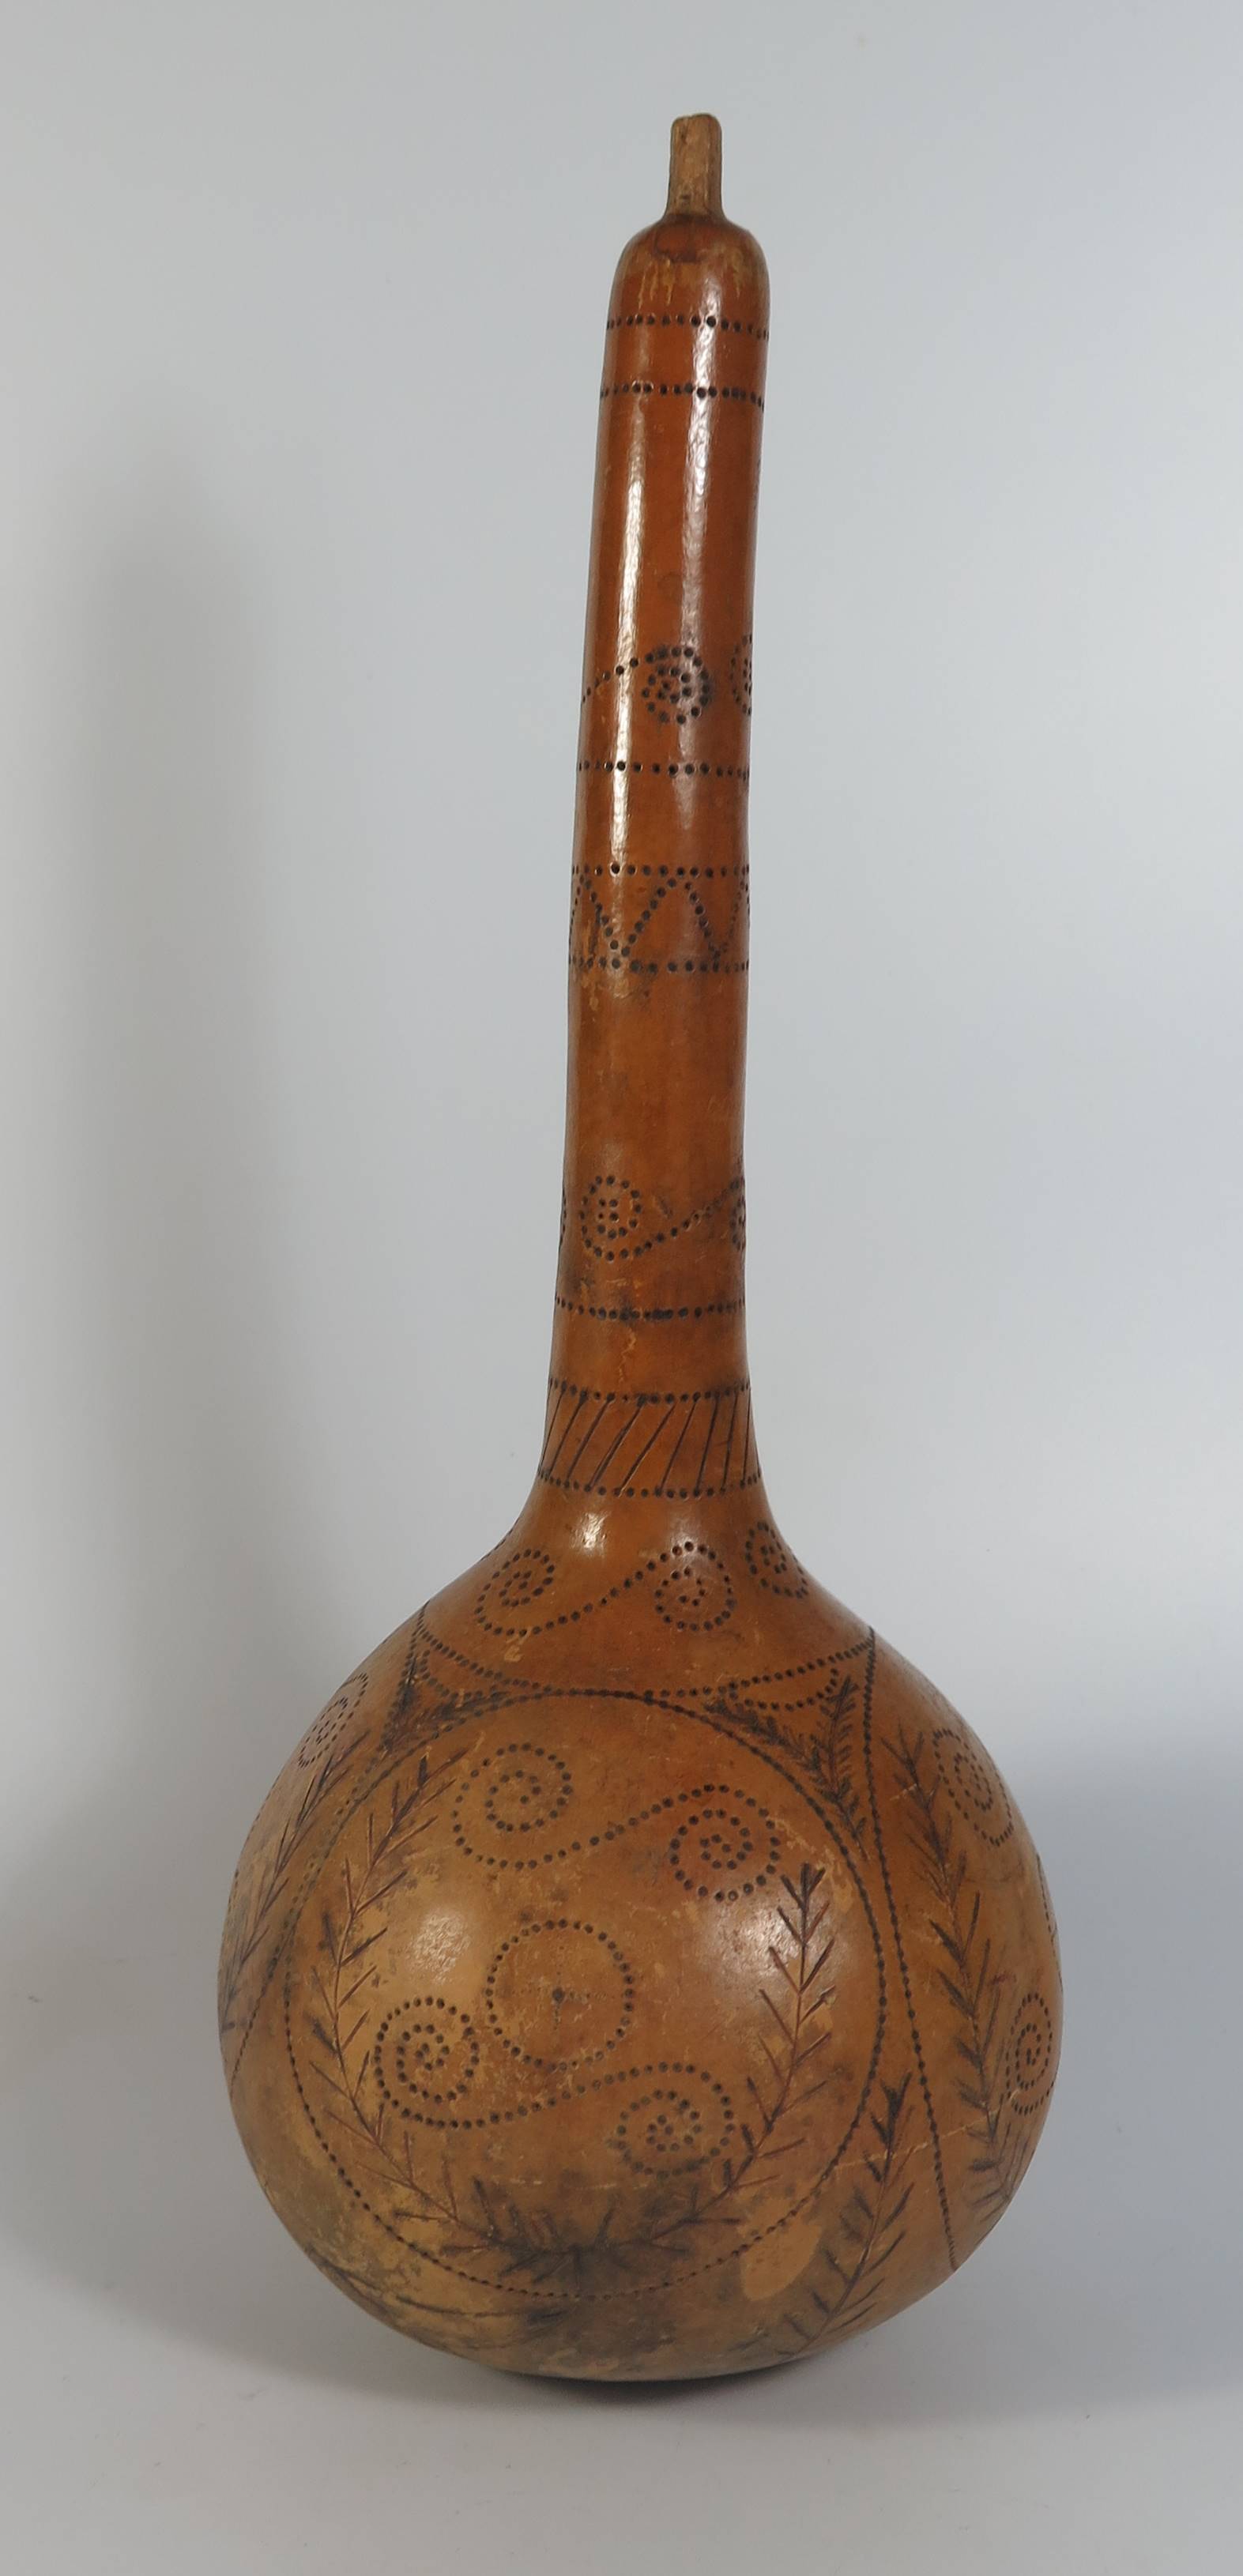 A Calabash with naive incised decoration